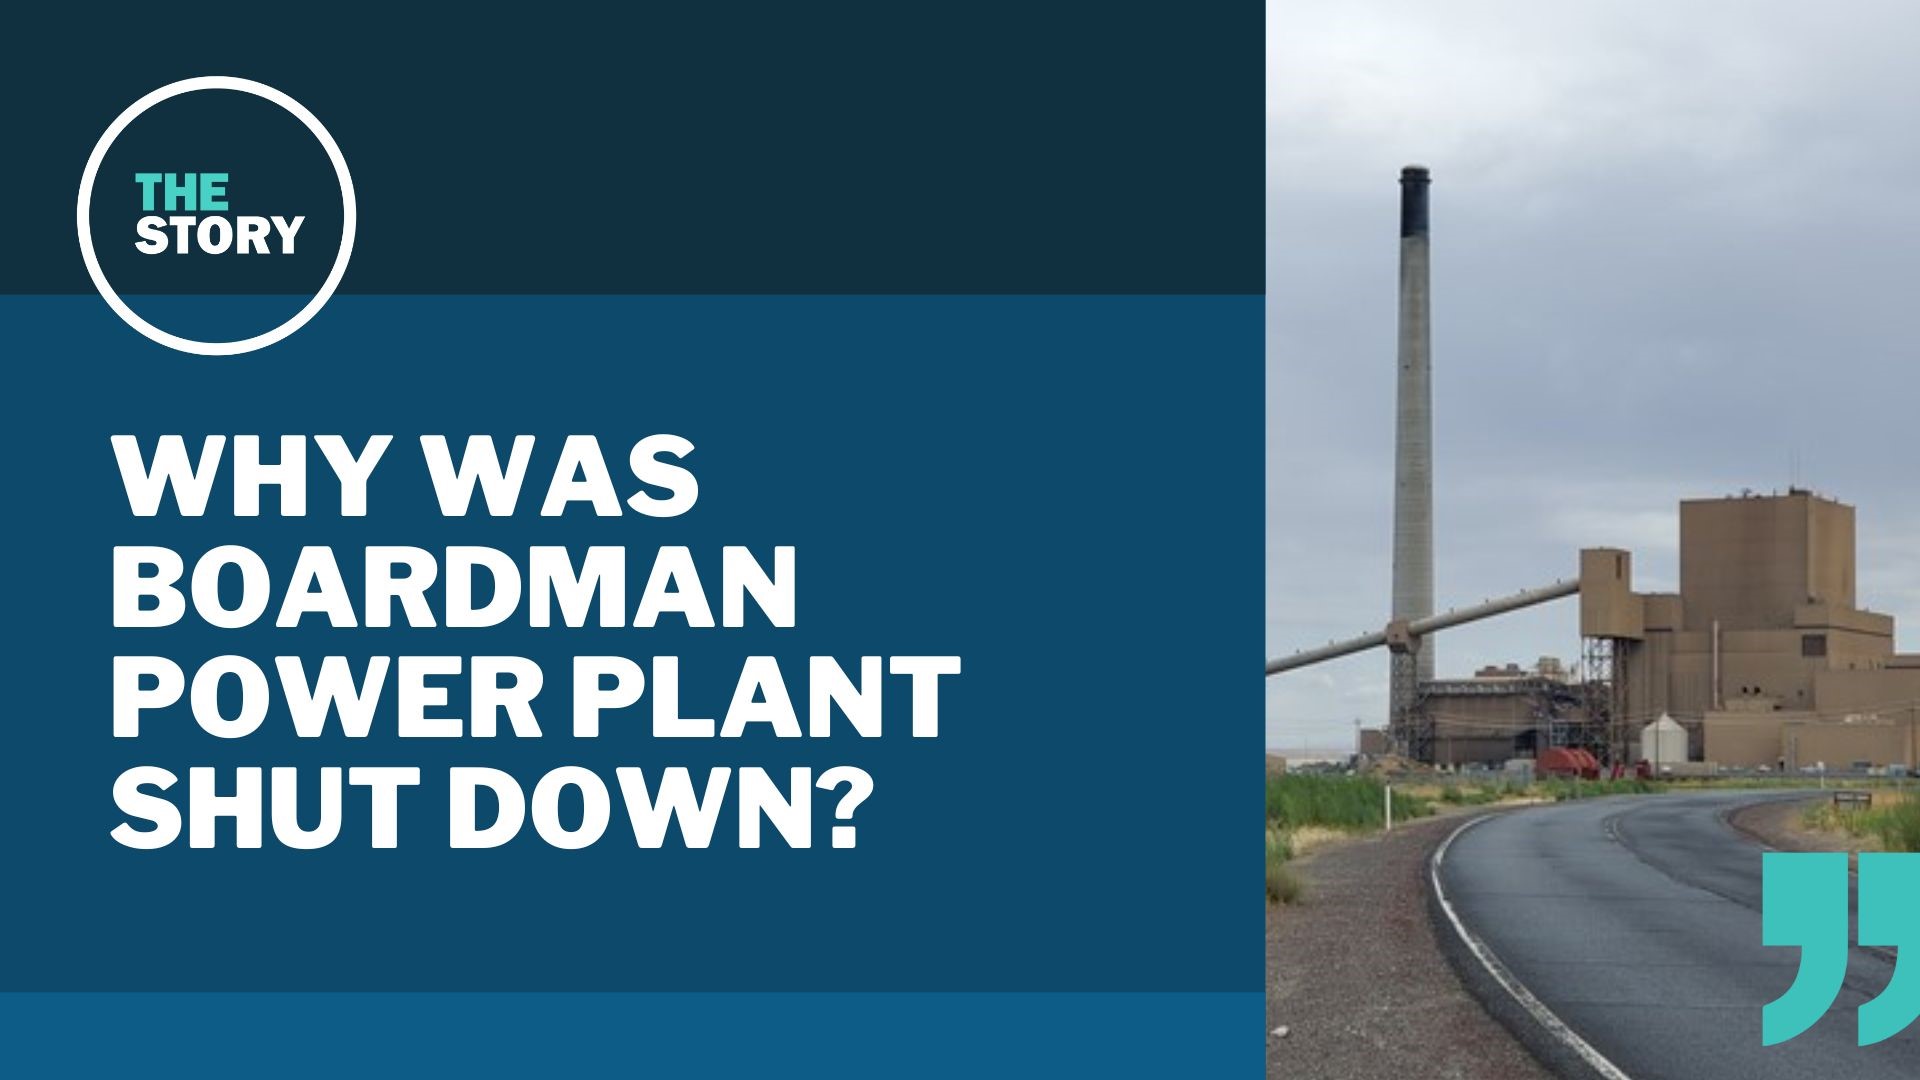 The coal power plant in Boardman, Ore. was demolished on Sept. 15, 2022. But why was it shut down in the first place?